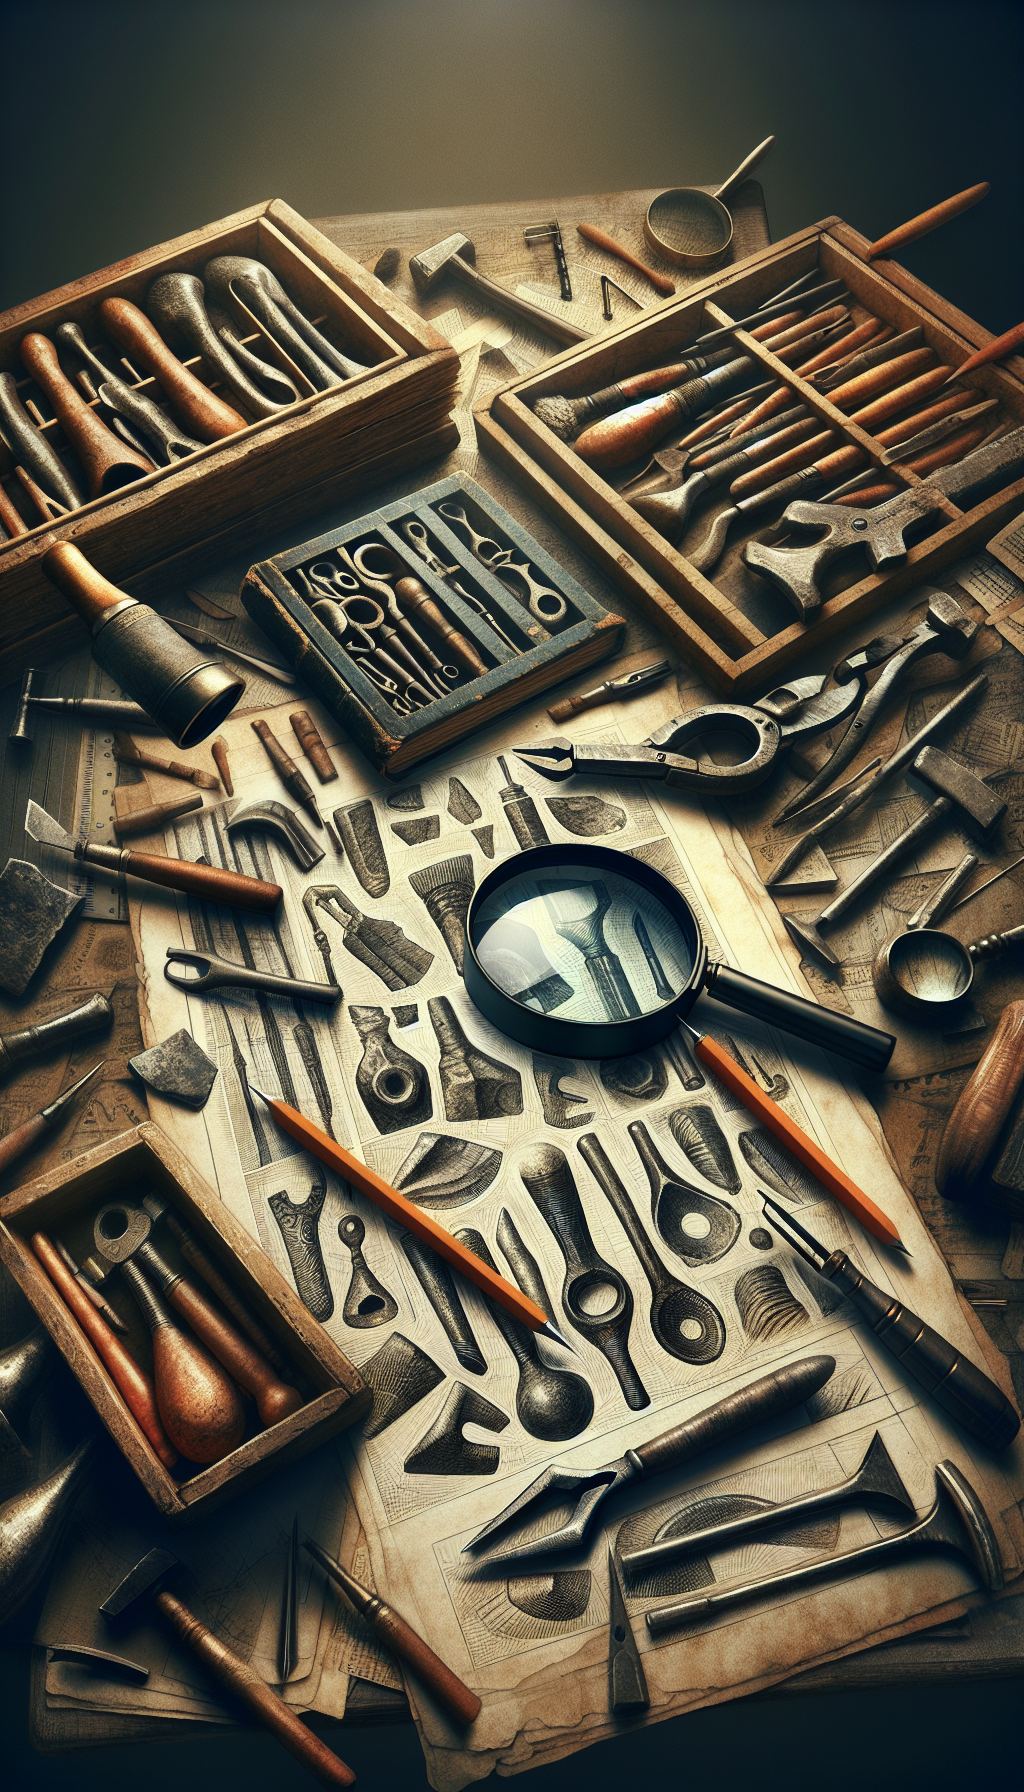 An illustration of an archaeologist's desk, cluttered with sketches of obscure antique hand tools, magnifying glass inspecting a peculiar gadget, and a dusty tome open to 'Antique Tool Types'. Each tool sketch transitions in style from realistic to caricatured, symbolizing the identification journey from obscurity to recognition, capturing the essence of the historical detective work in tool identification.